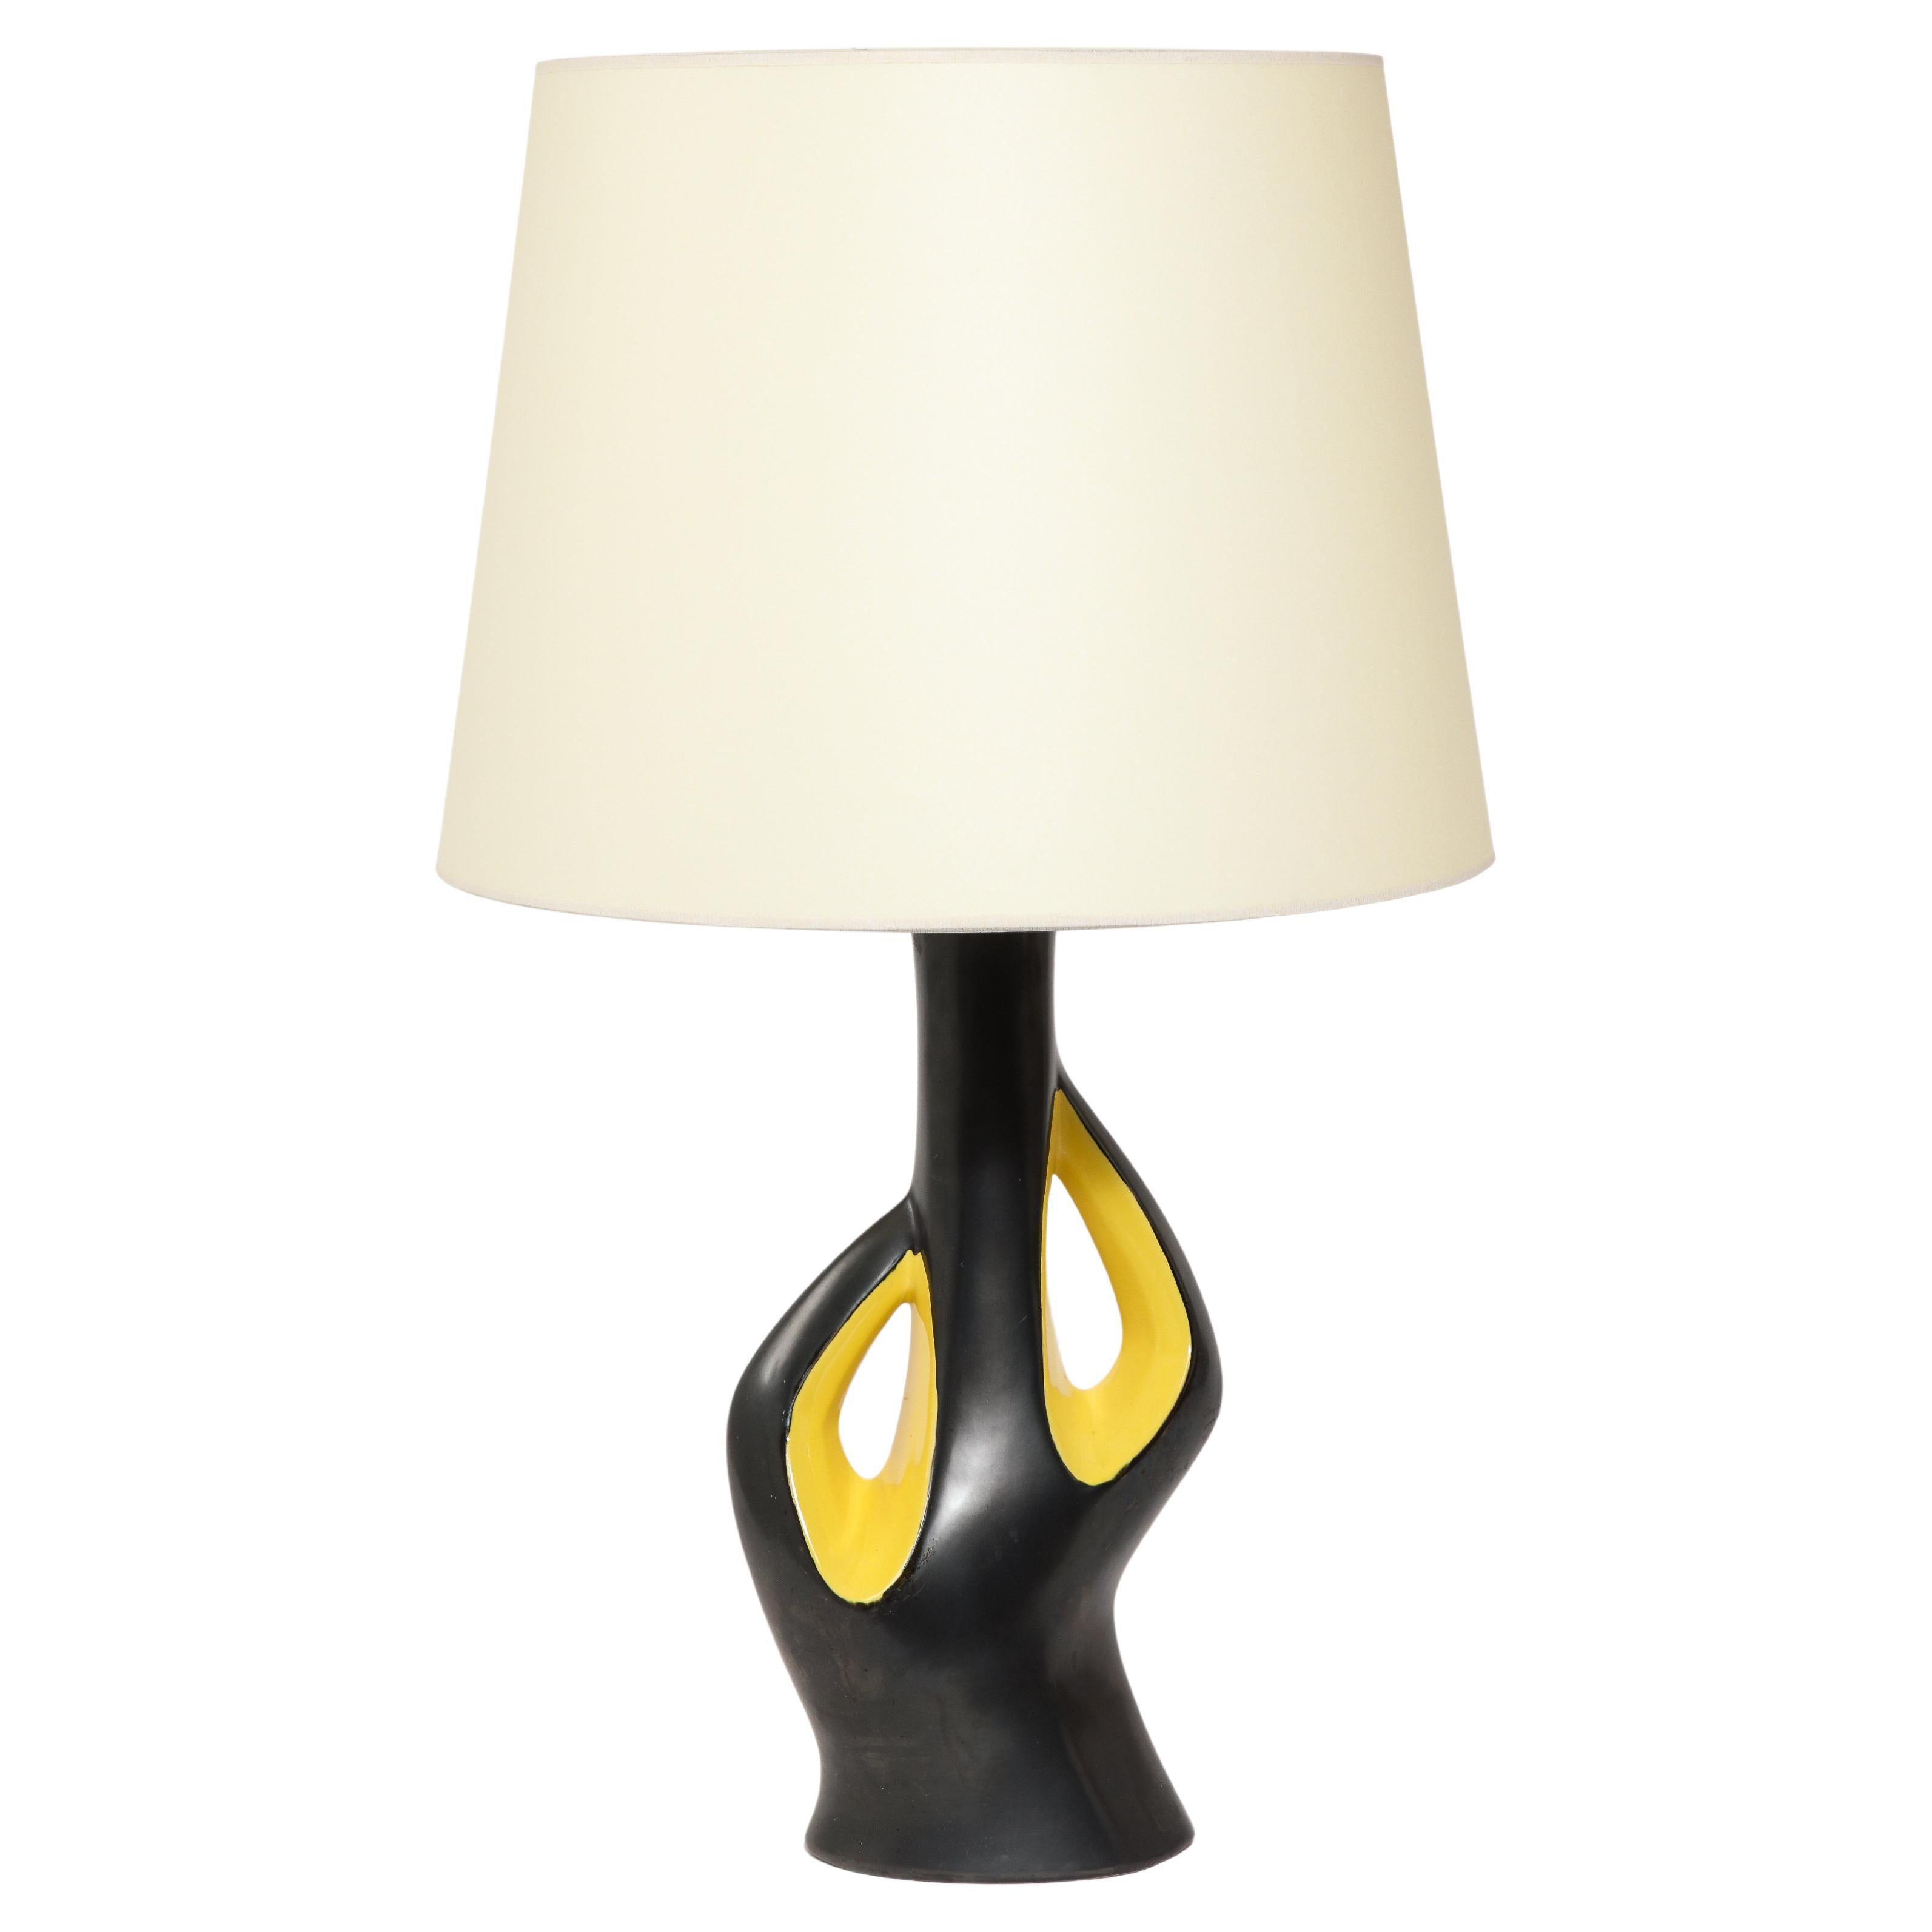 Large Elchinger Two-Tone Yellow & Black Ceramic Table Lamp, France 1950's For Sale